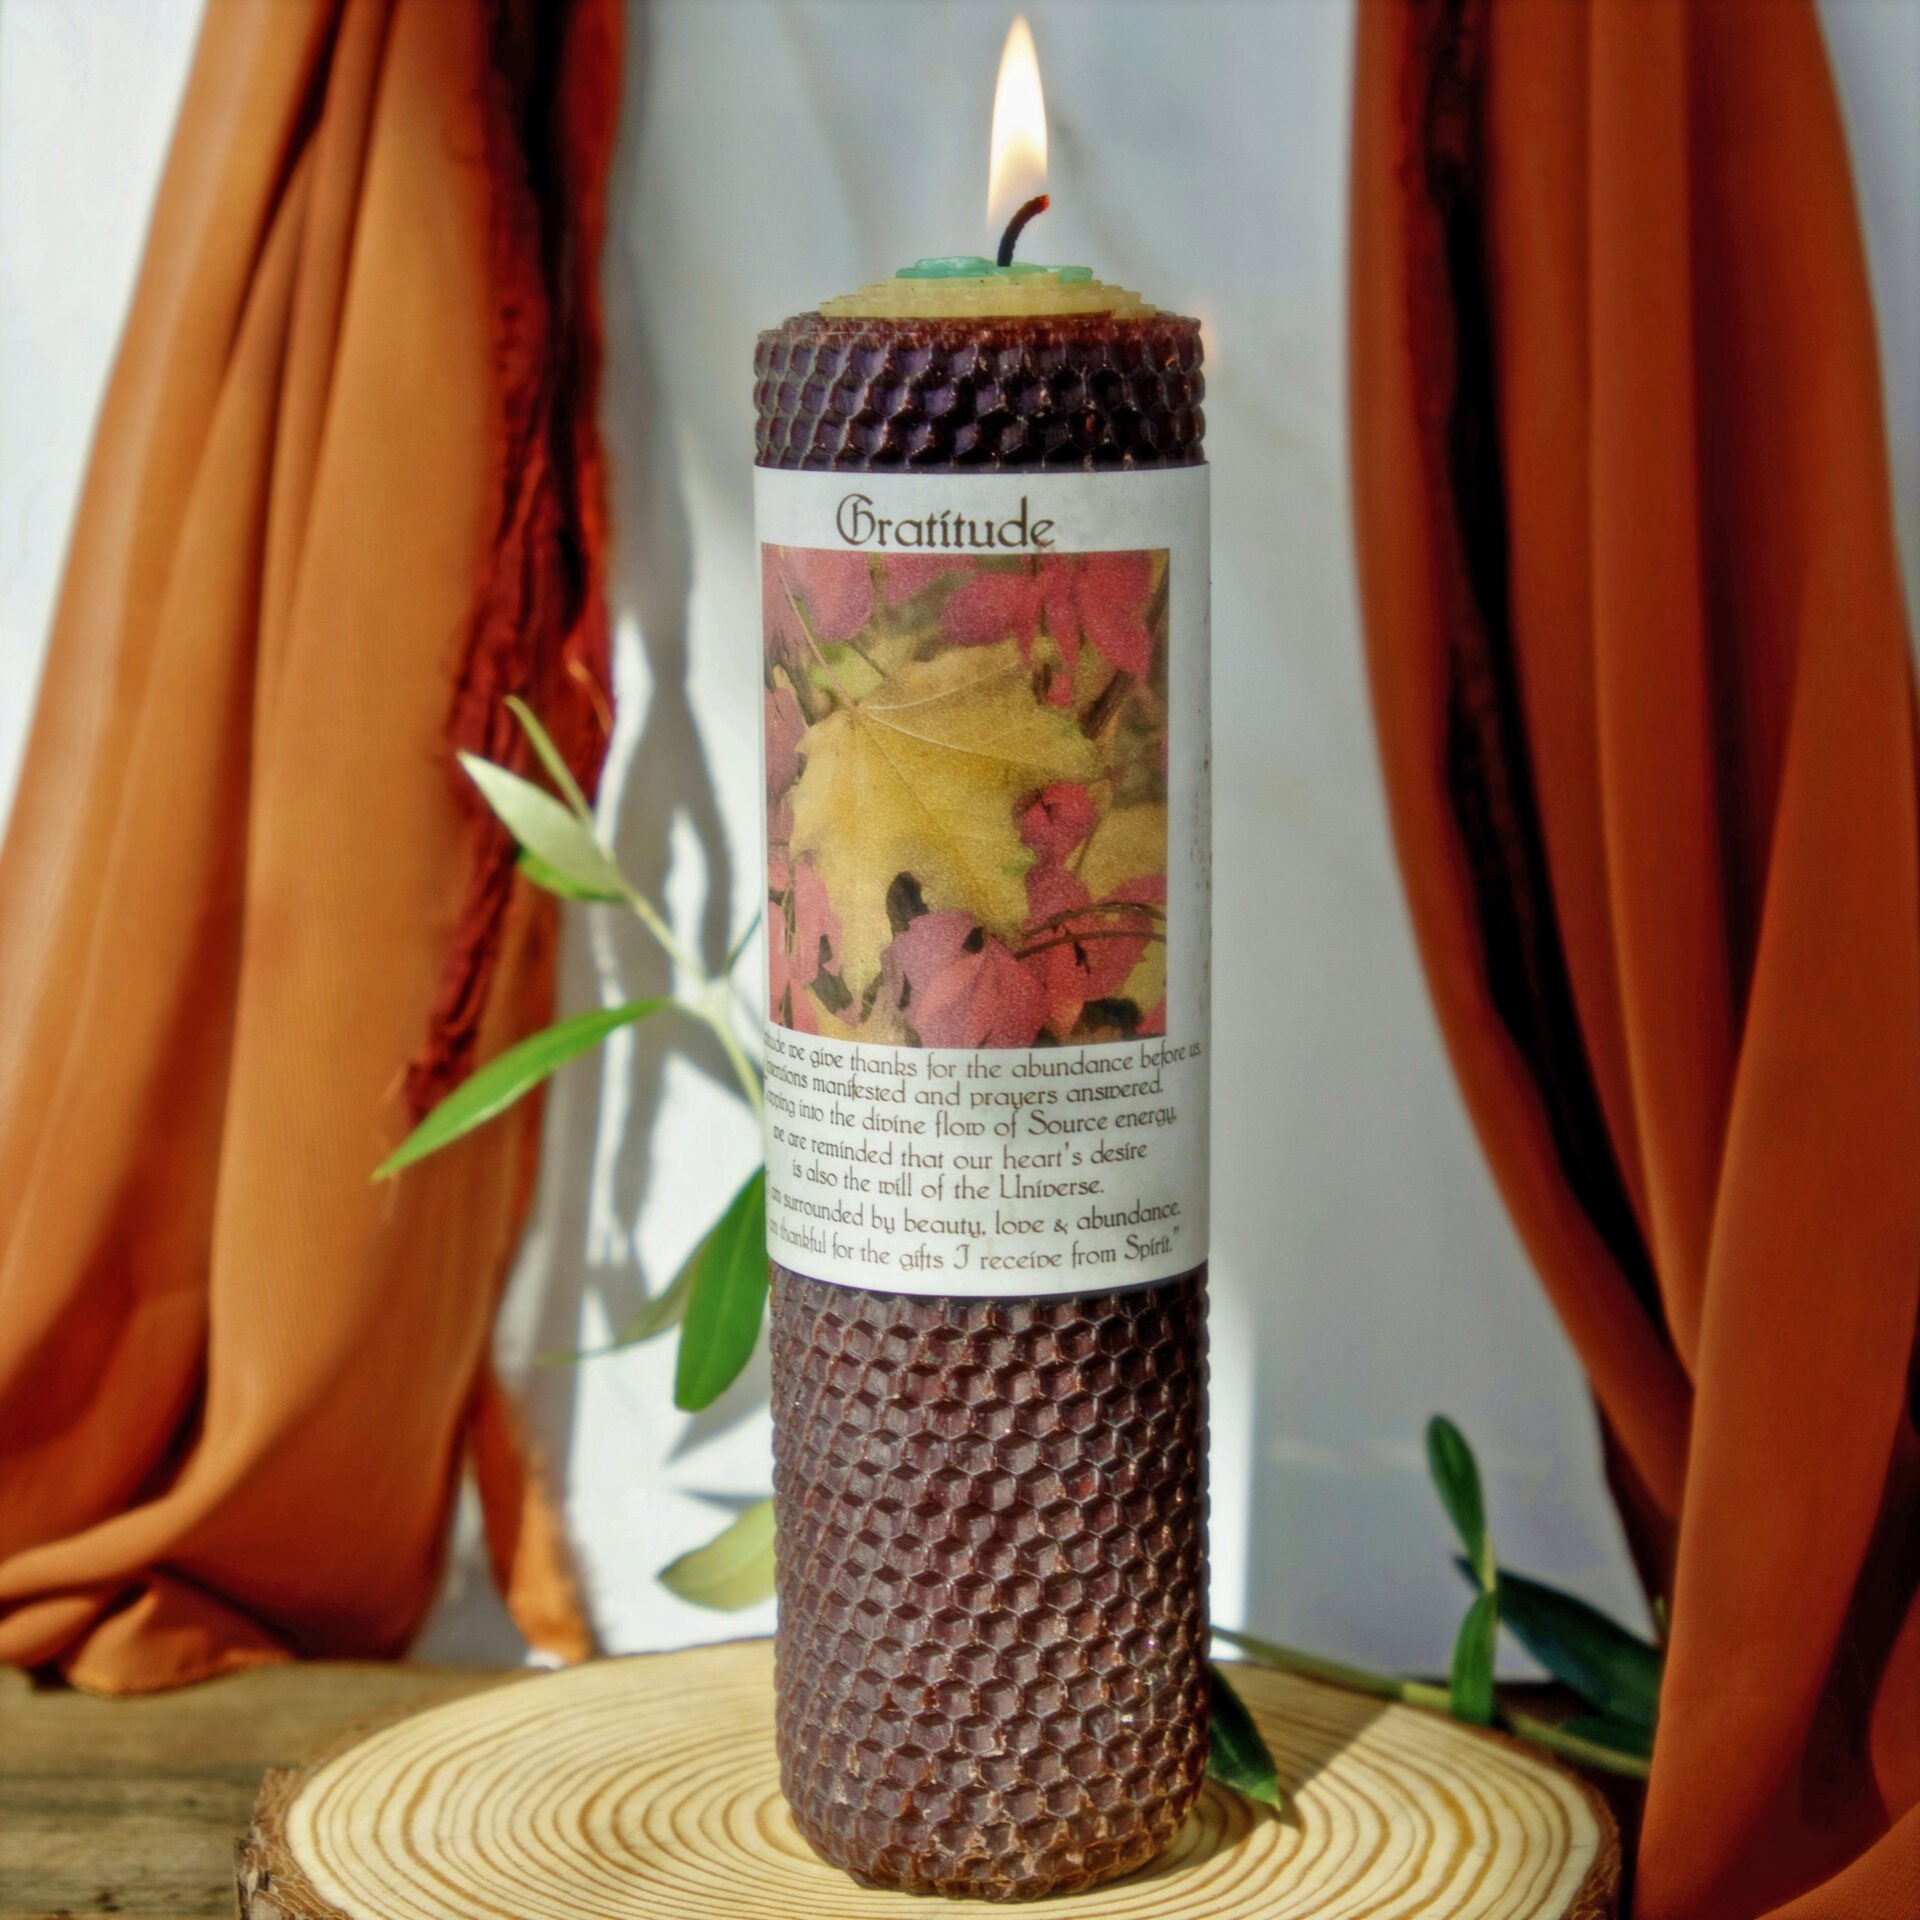 Sage Goddess Gratitude Beeswax Intention Candle for giving thanks